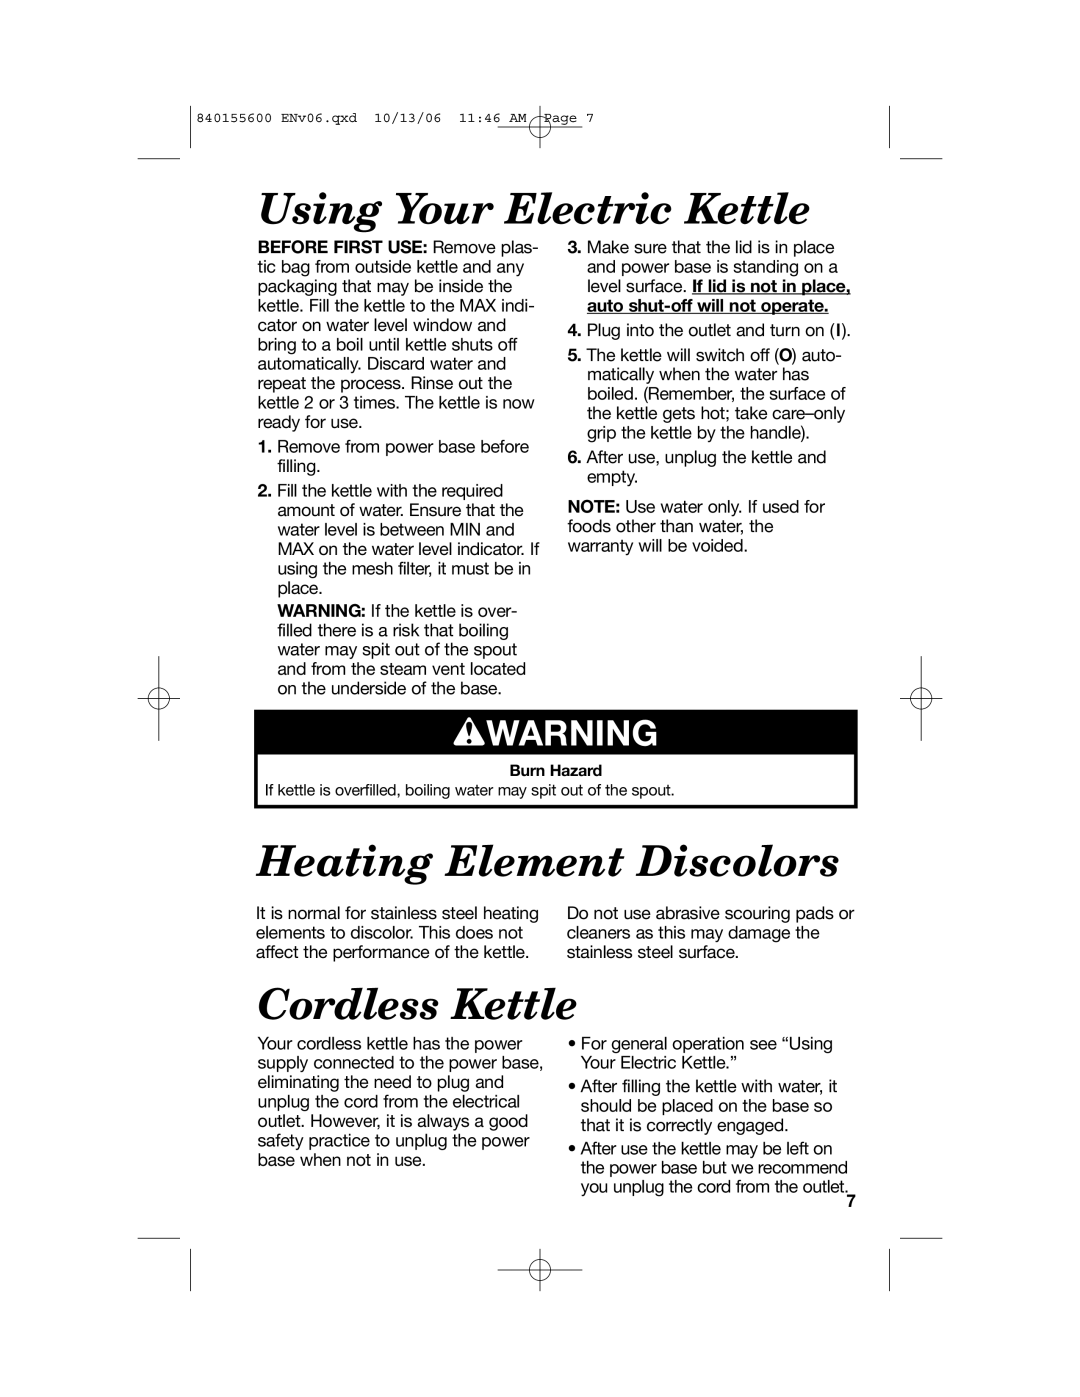 Hamilton Beach 40990 manual Using Your Electric Kettle, Heating Element Discolors, Cordless Kettle, wWARNING 